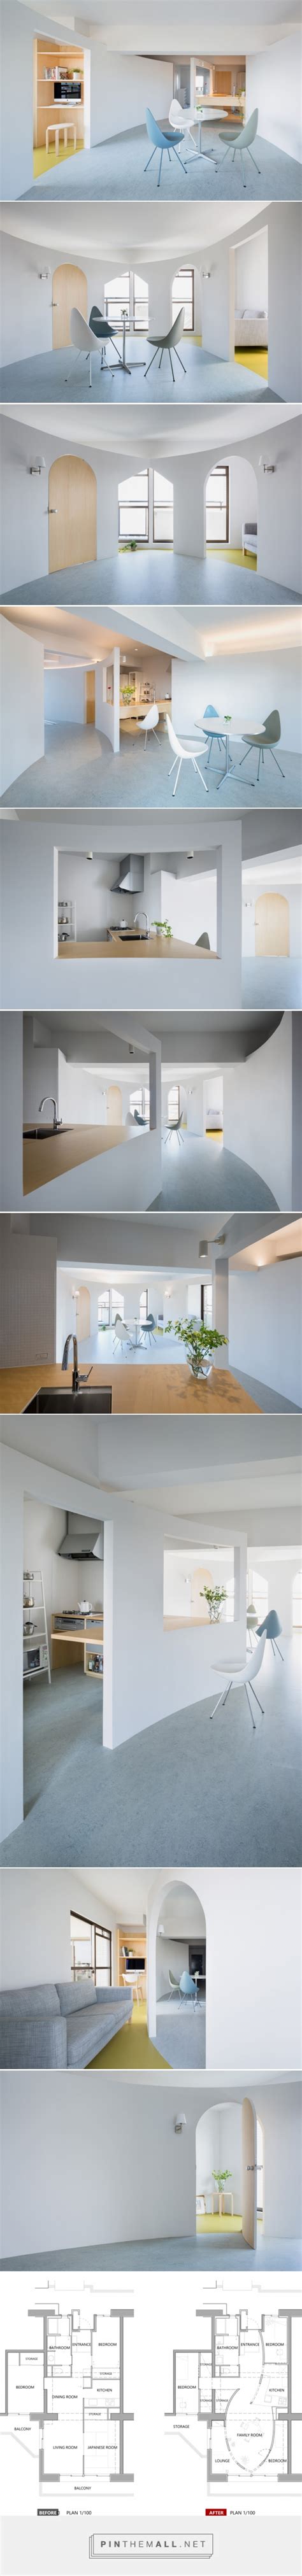 Mamm Design Renovates Japanese Apartment With Curving Walls Created